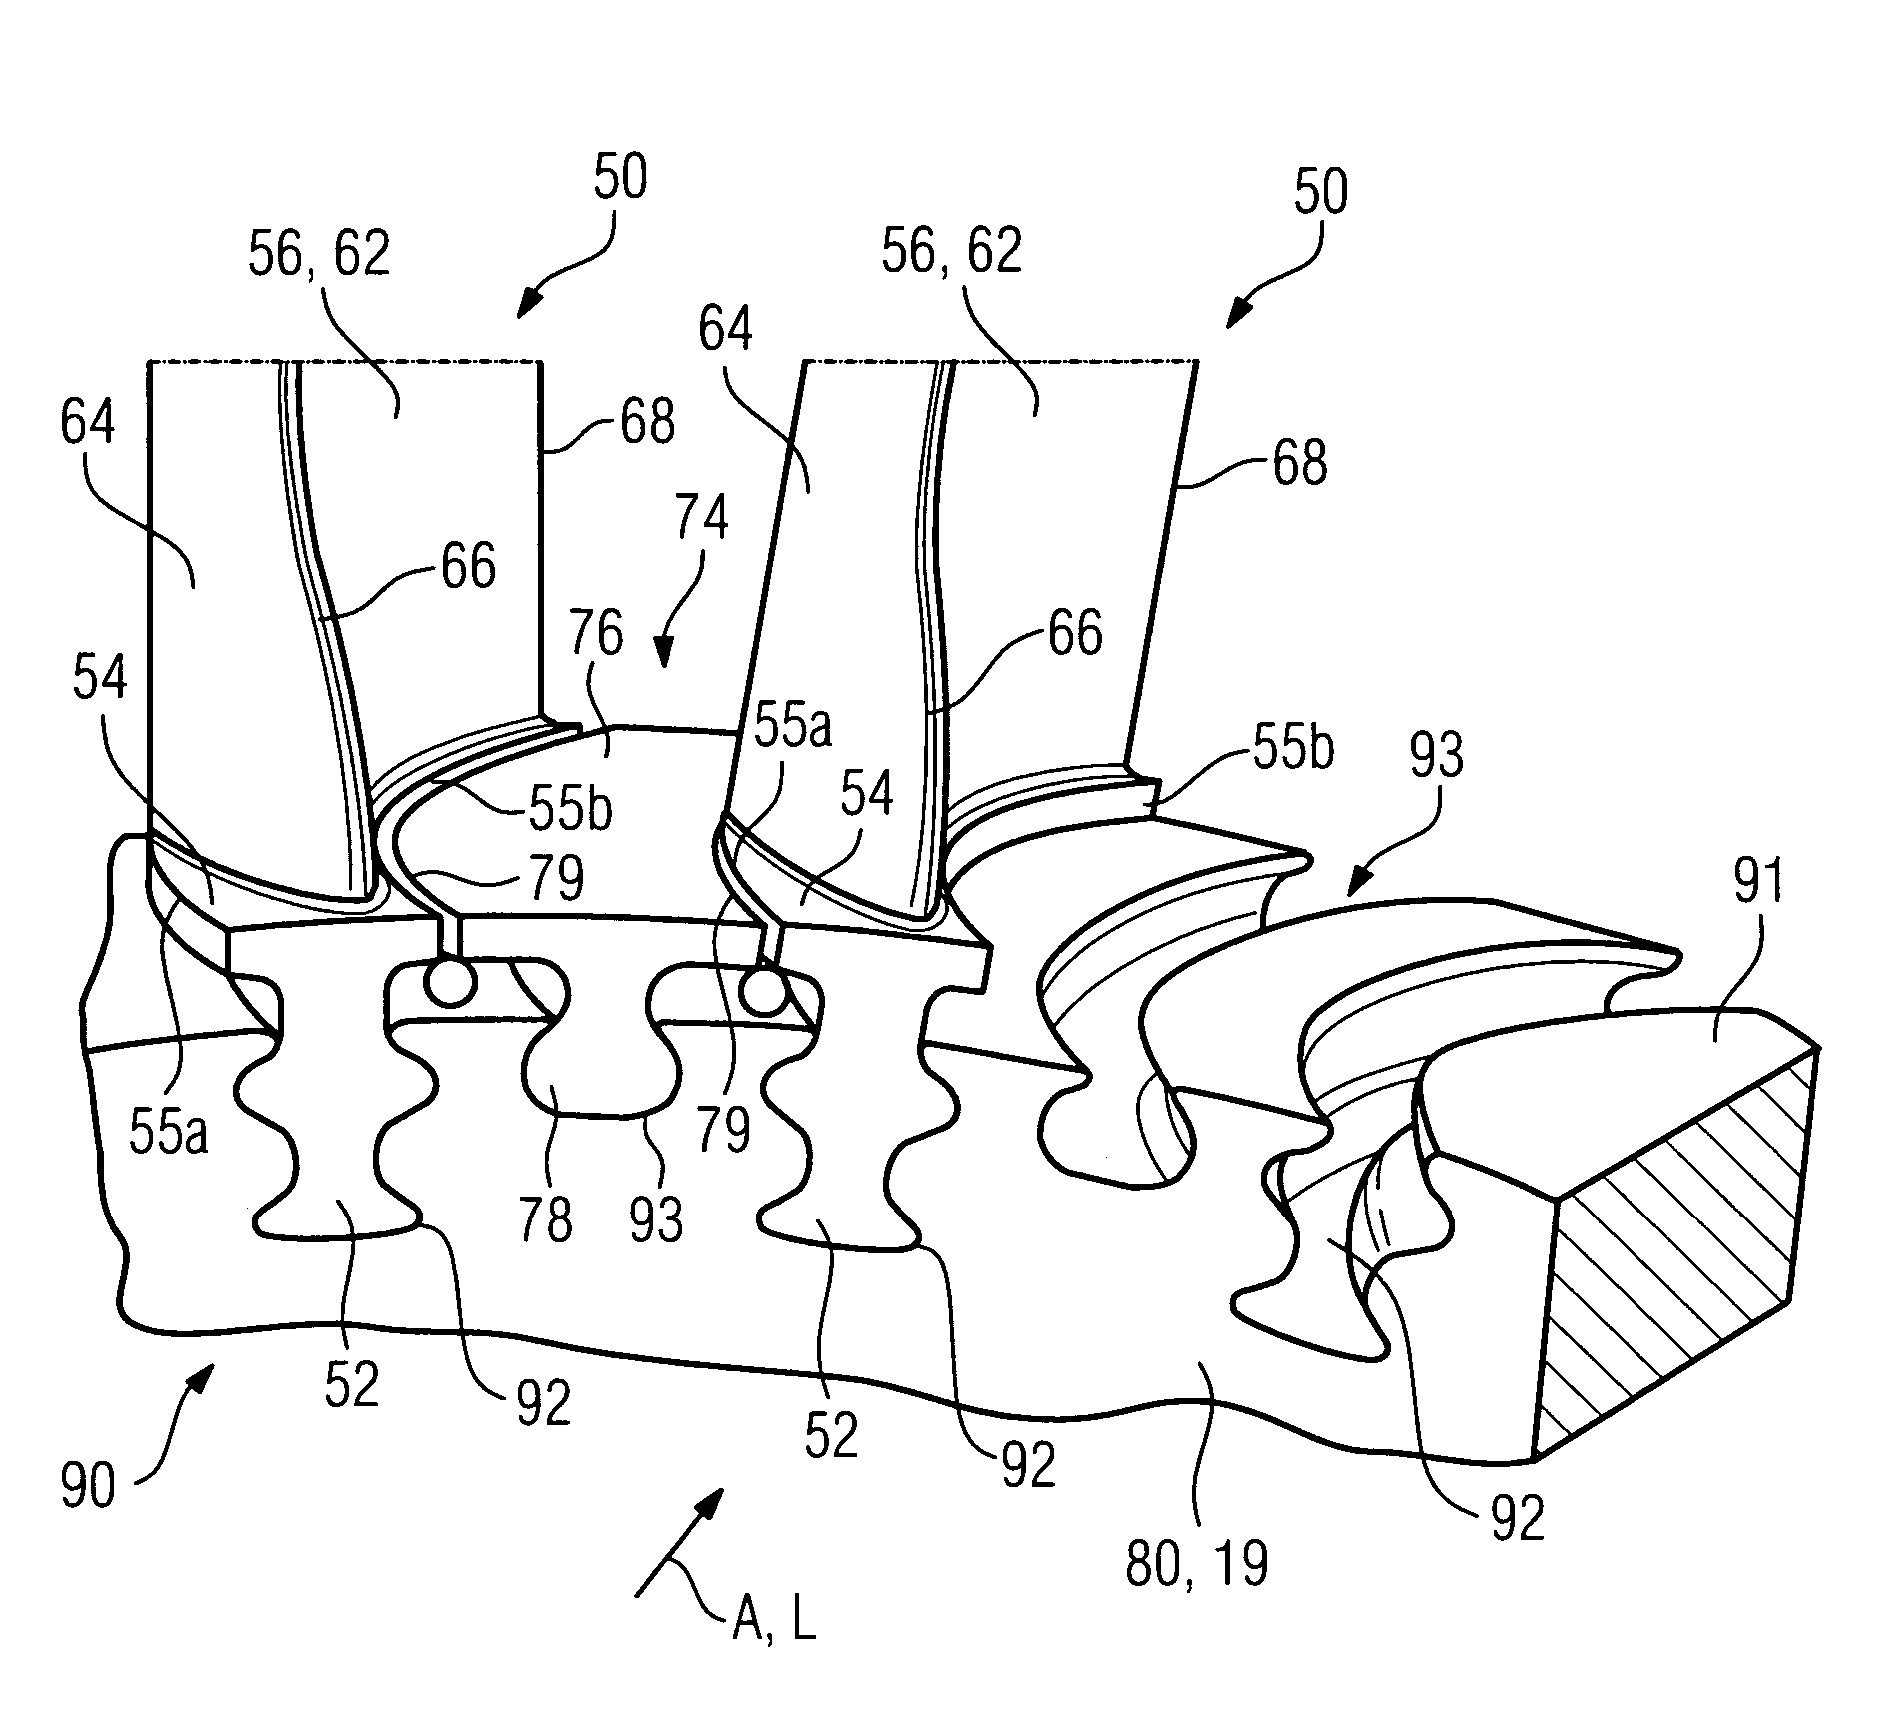 Gas turbine blade or vane and platform element for a gas turbine blade or vane ring of a gas turbine, supporting structure for securing gas turbine blades or vanes arranged in a ring, gas turbine blade or vane ring and the use of a gas turbine blade or vane ring